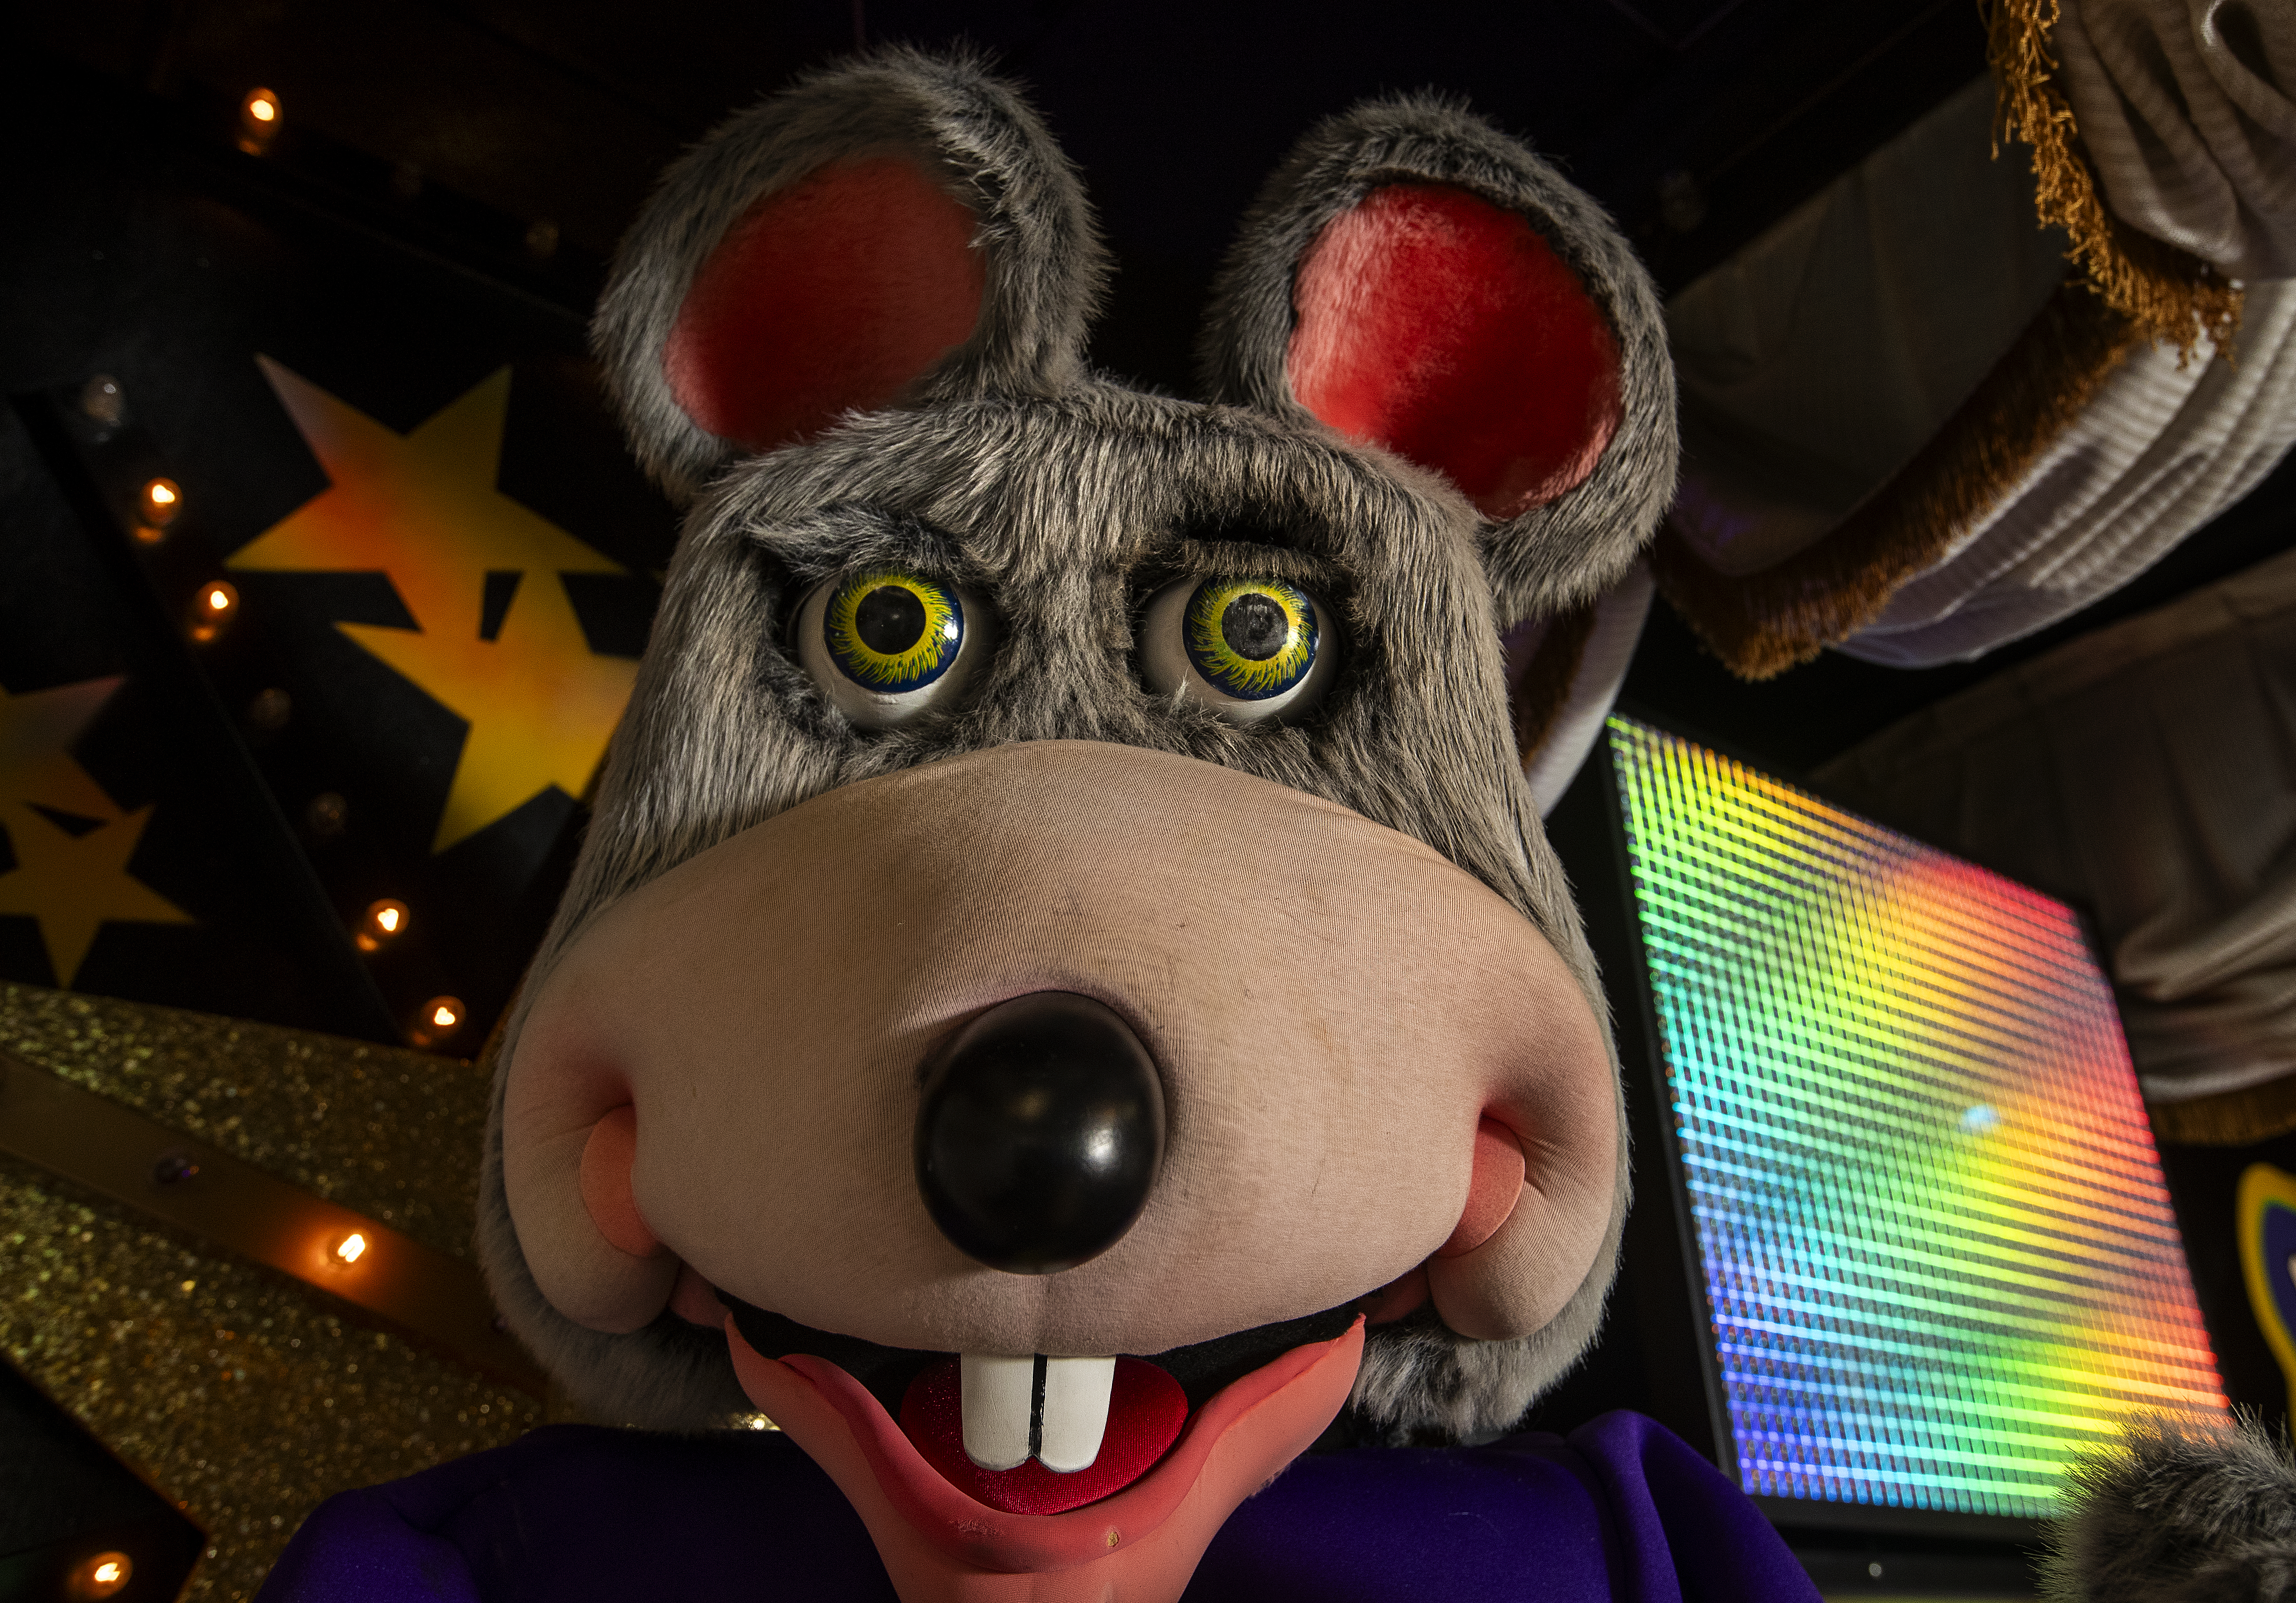 A close up shot of the head of an animatronic Chuck E. Cheese 